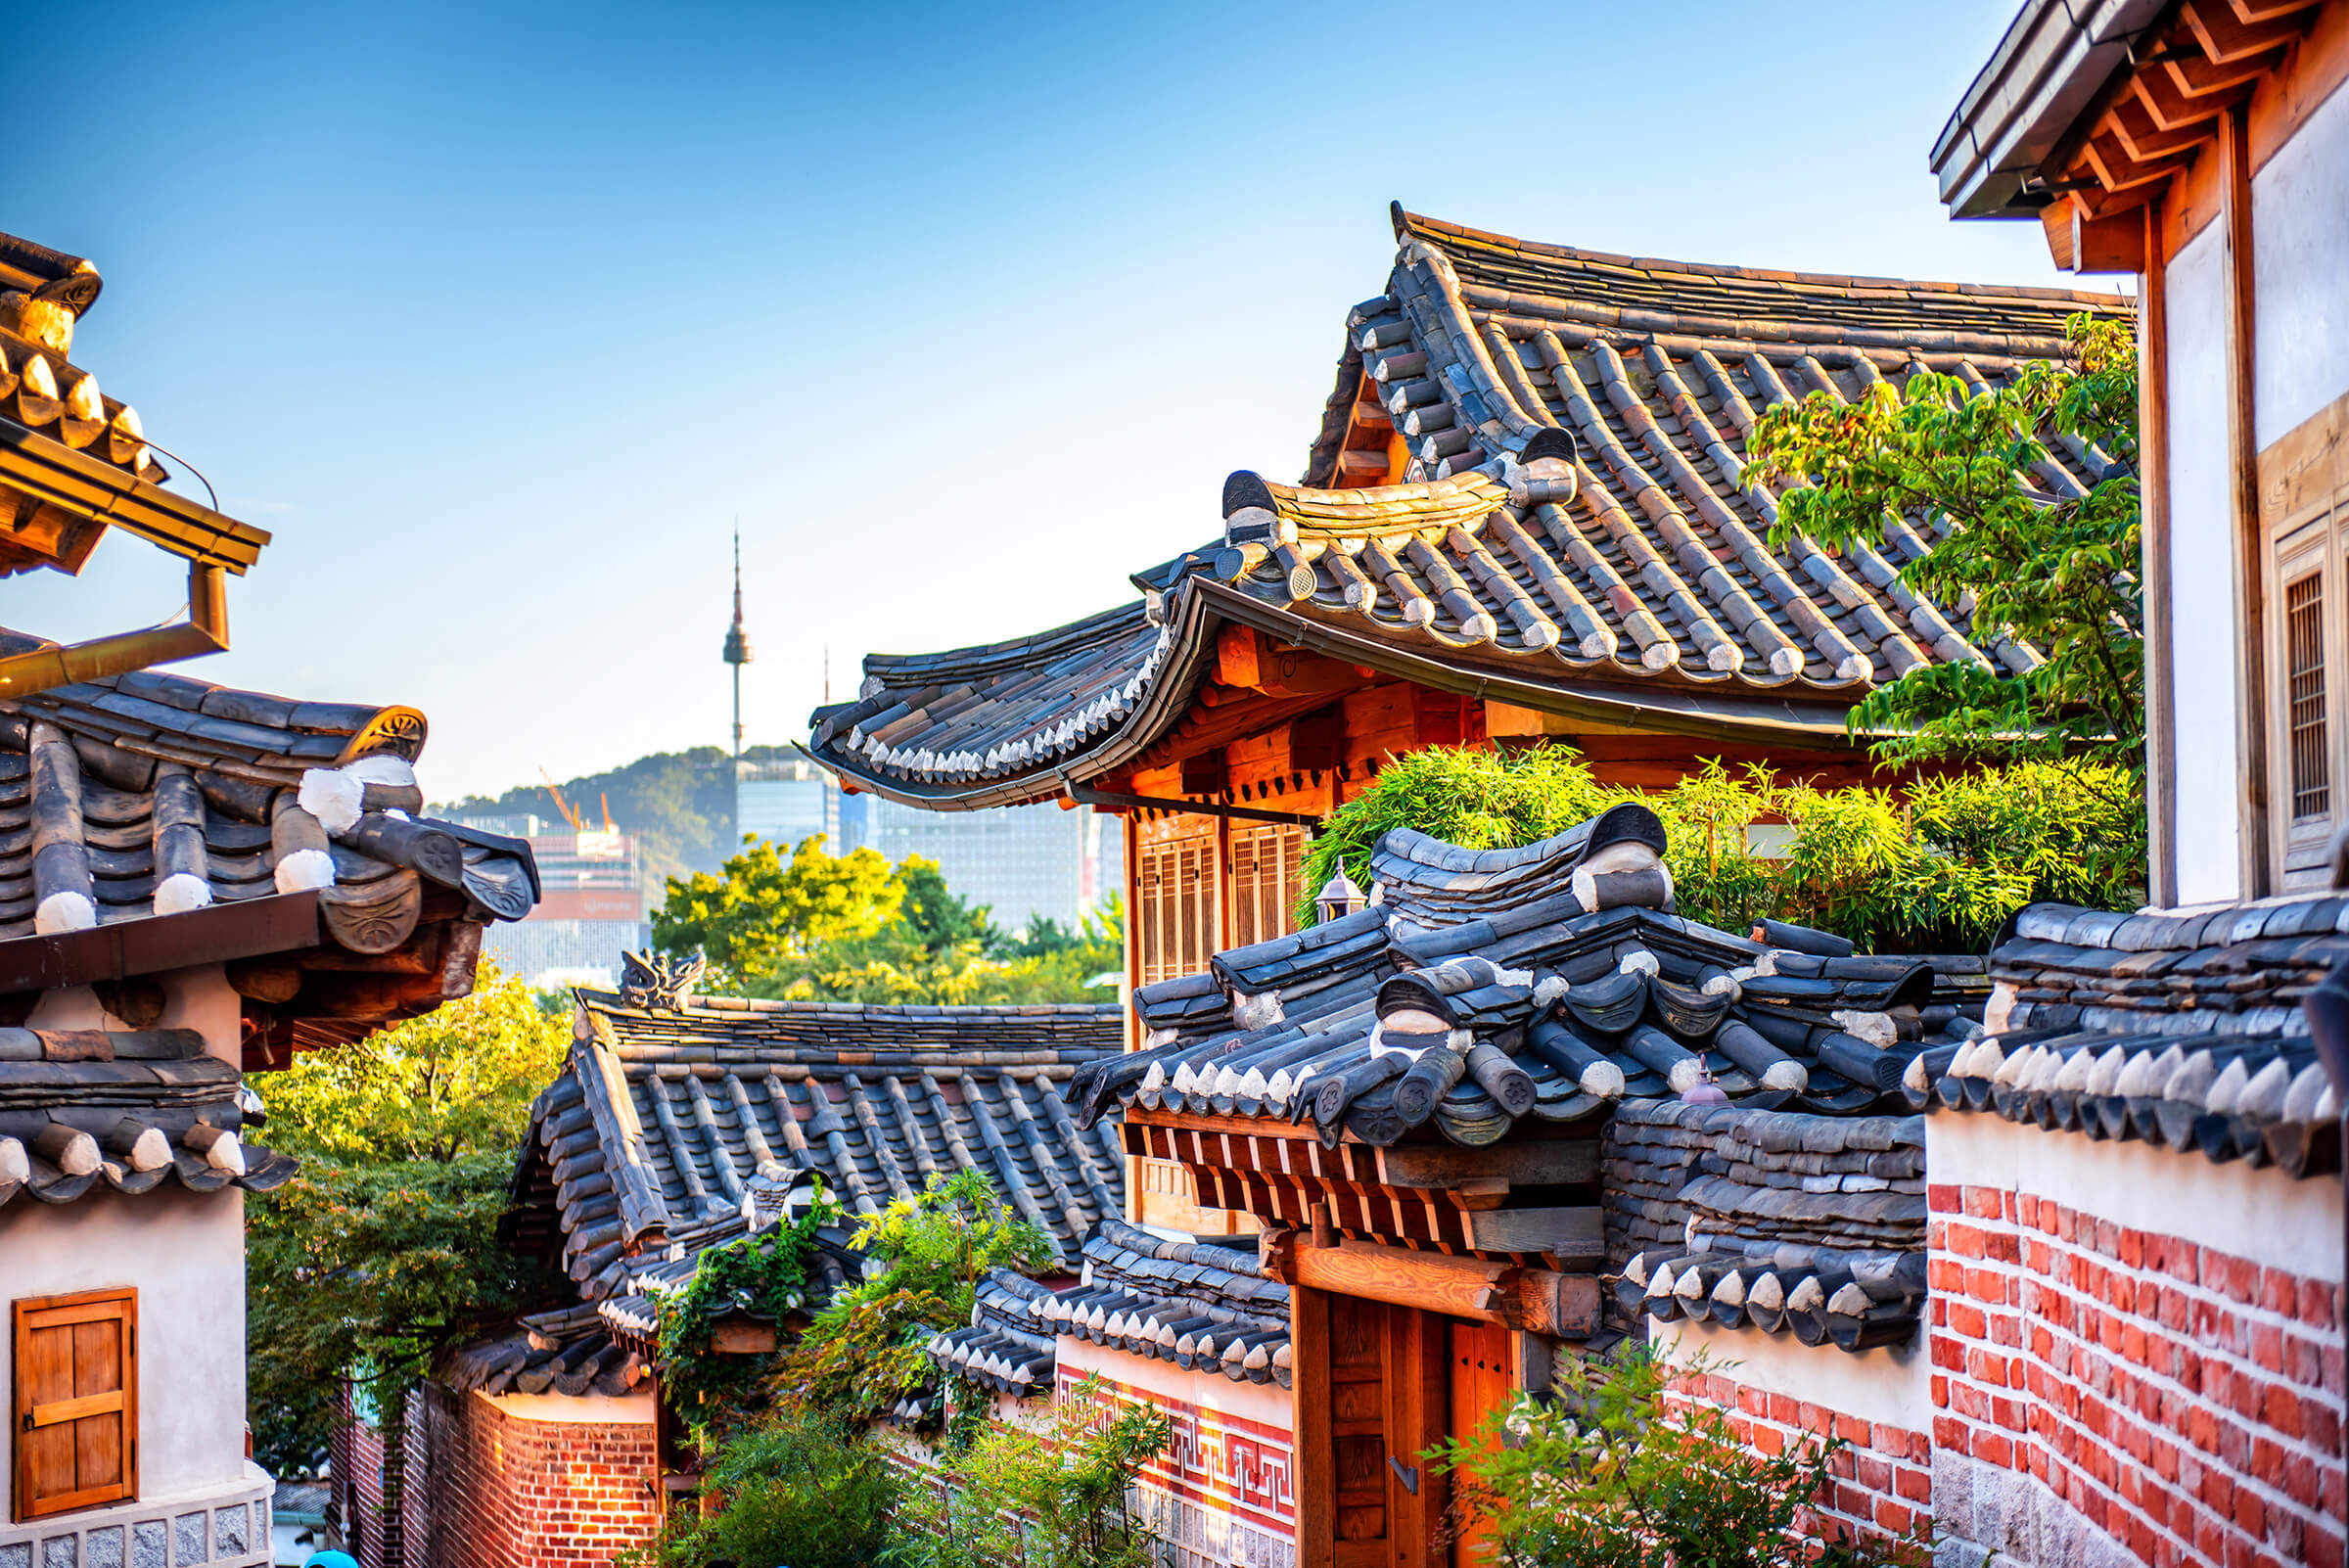 asia, architecture, roof, building, ancient, culture, pagoda, traditional, city, travel, forbidden, old, sky, pavilion, oriental, tourism, landmark, red, korea, seoul, korean, namsan, tower, natural, autumn, history, historic, outdoor, town, downtown, south